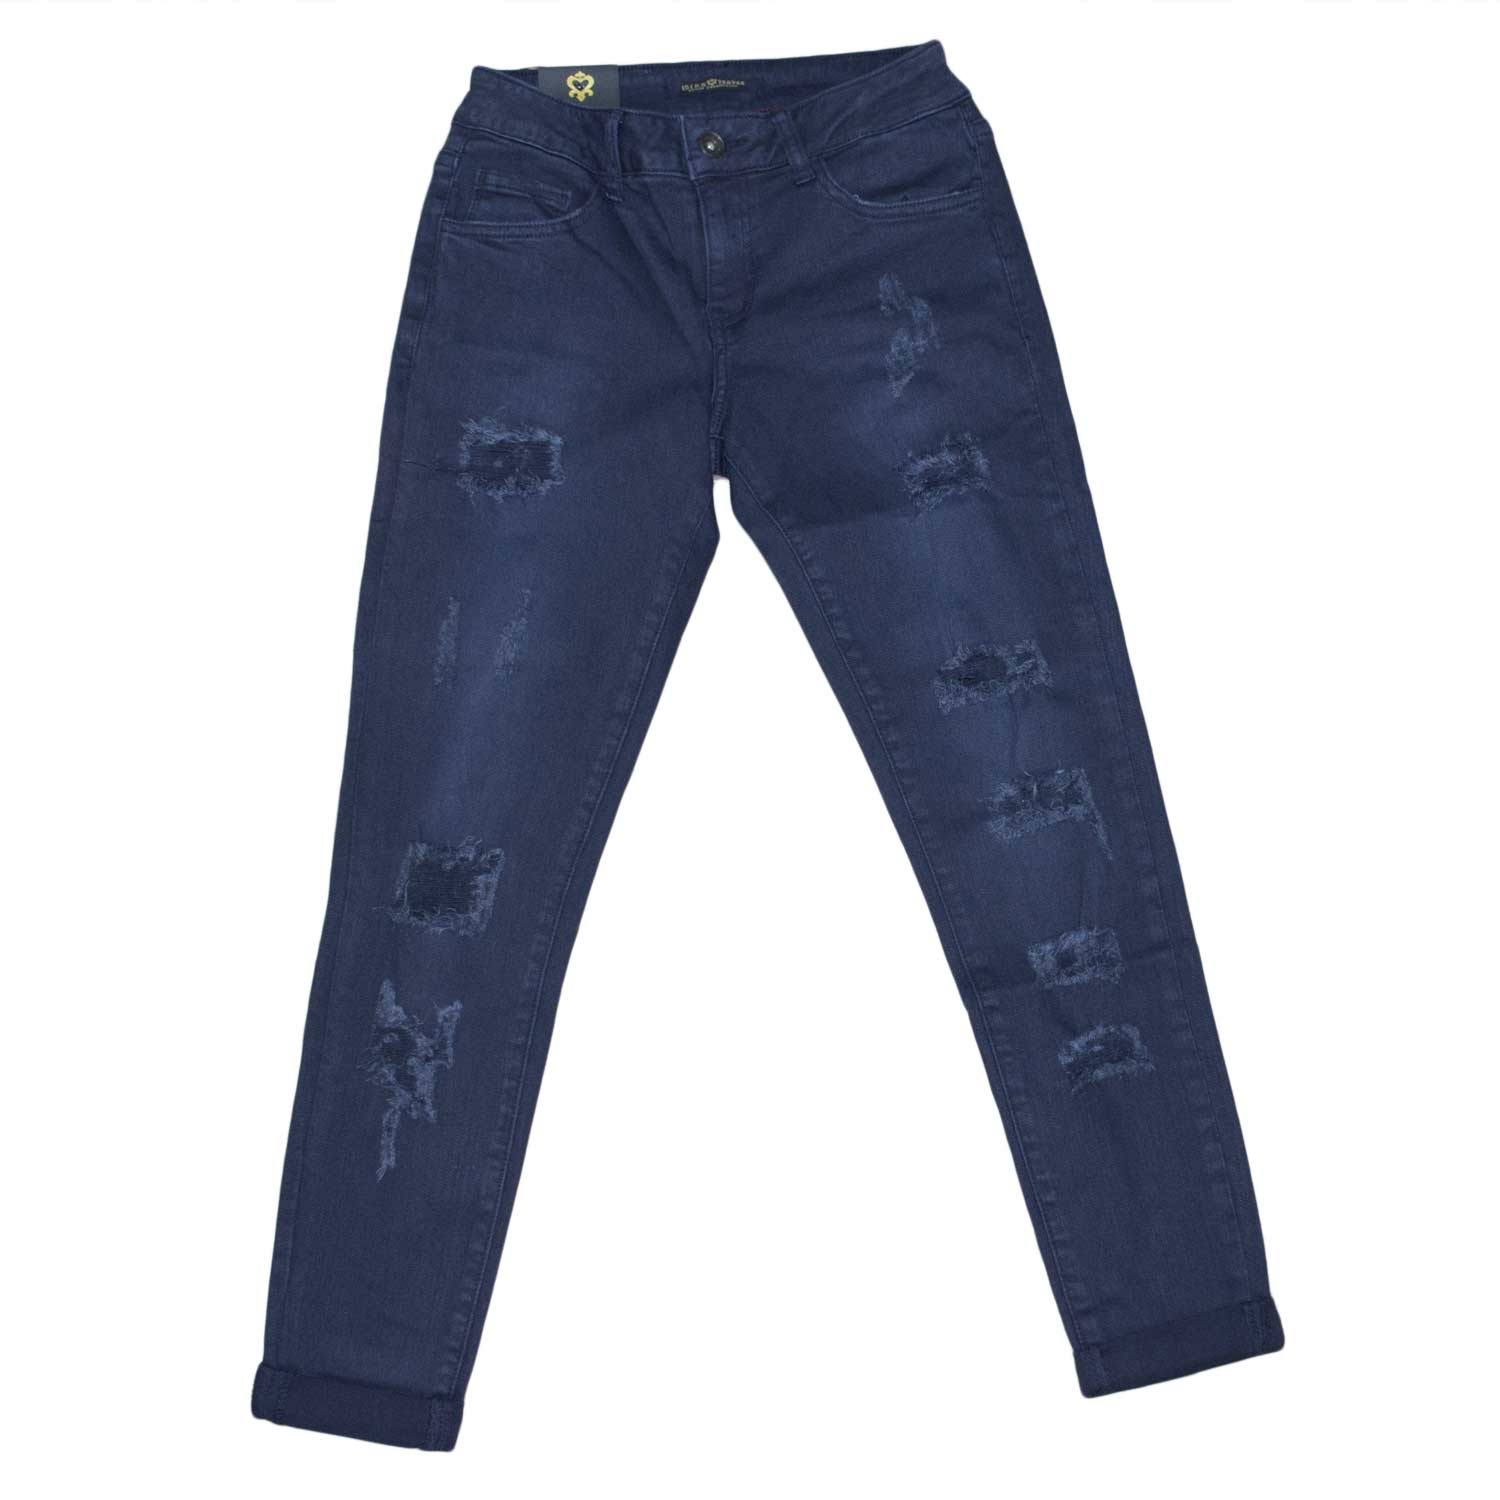 Jeans donna blu notte stracciato chic glamour made in italy